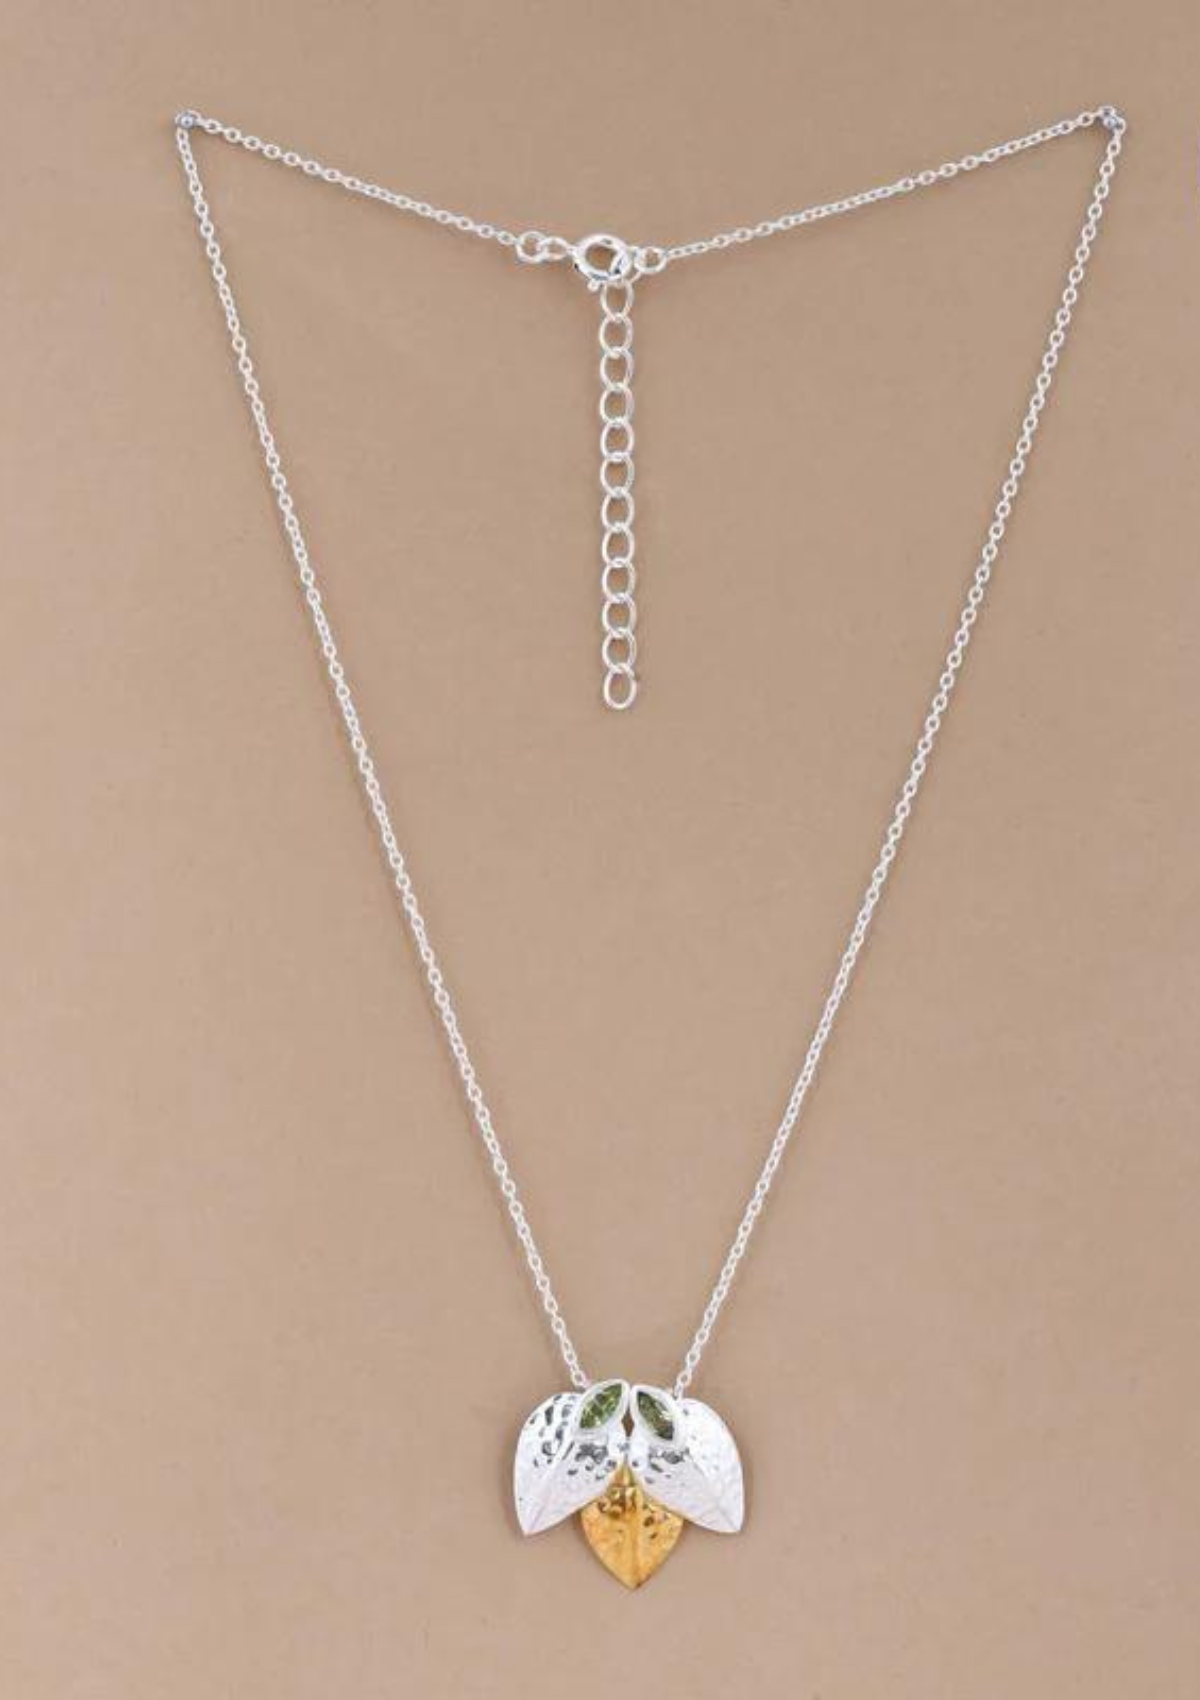 Hammered Silver Peridot studded Pendant Necklace